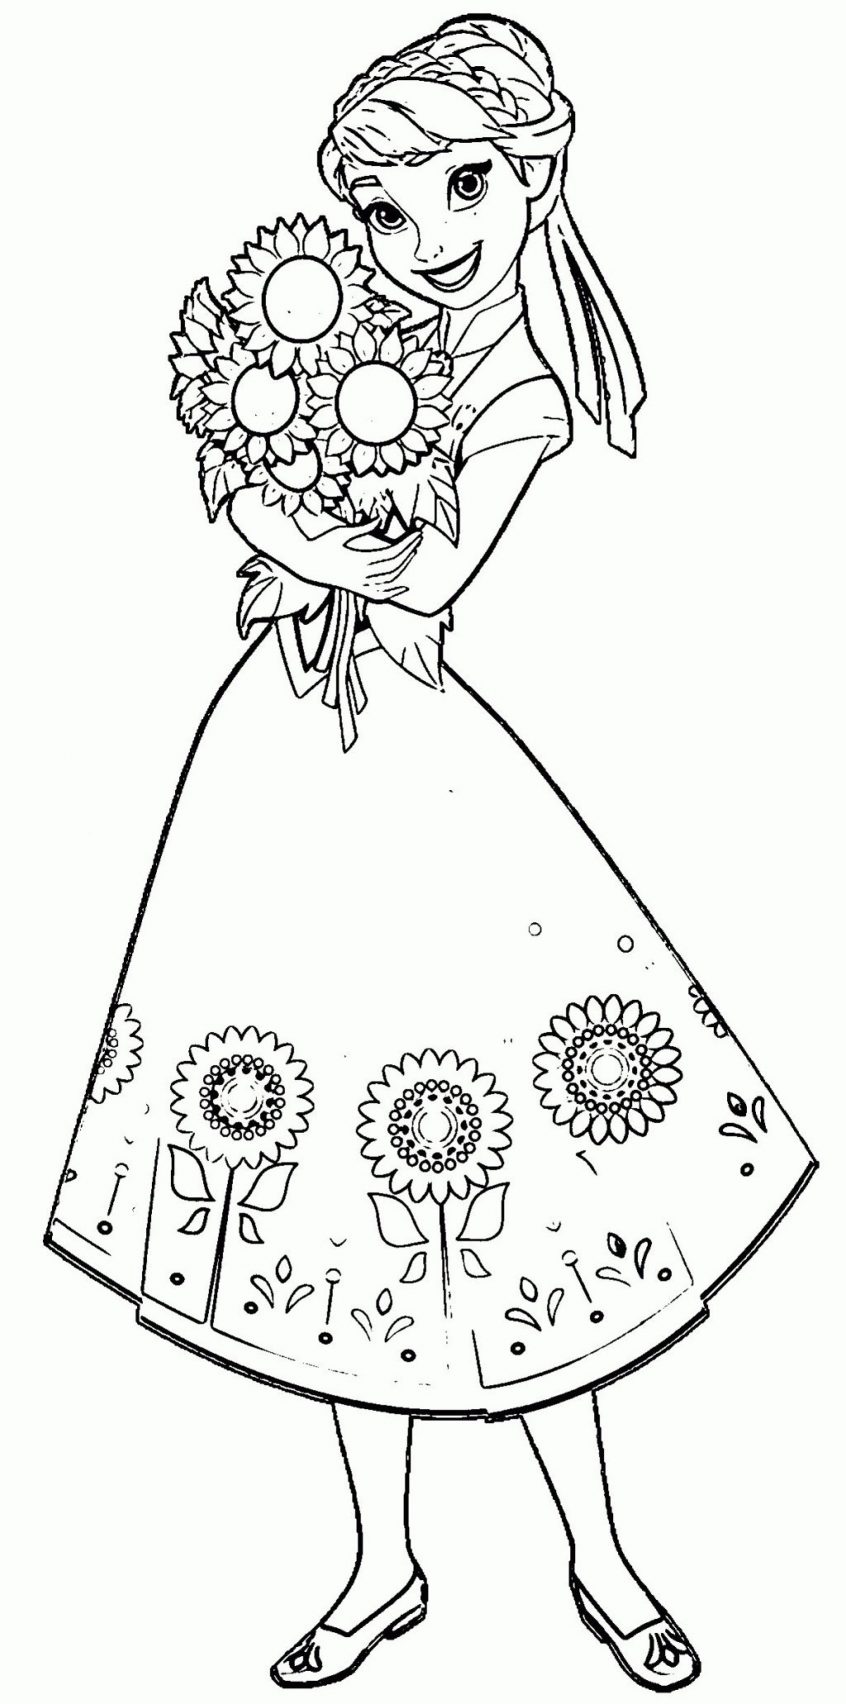 Frozen Fever Coloring Pages - Coloring Home